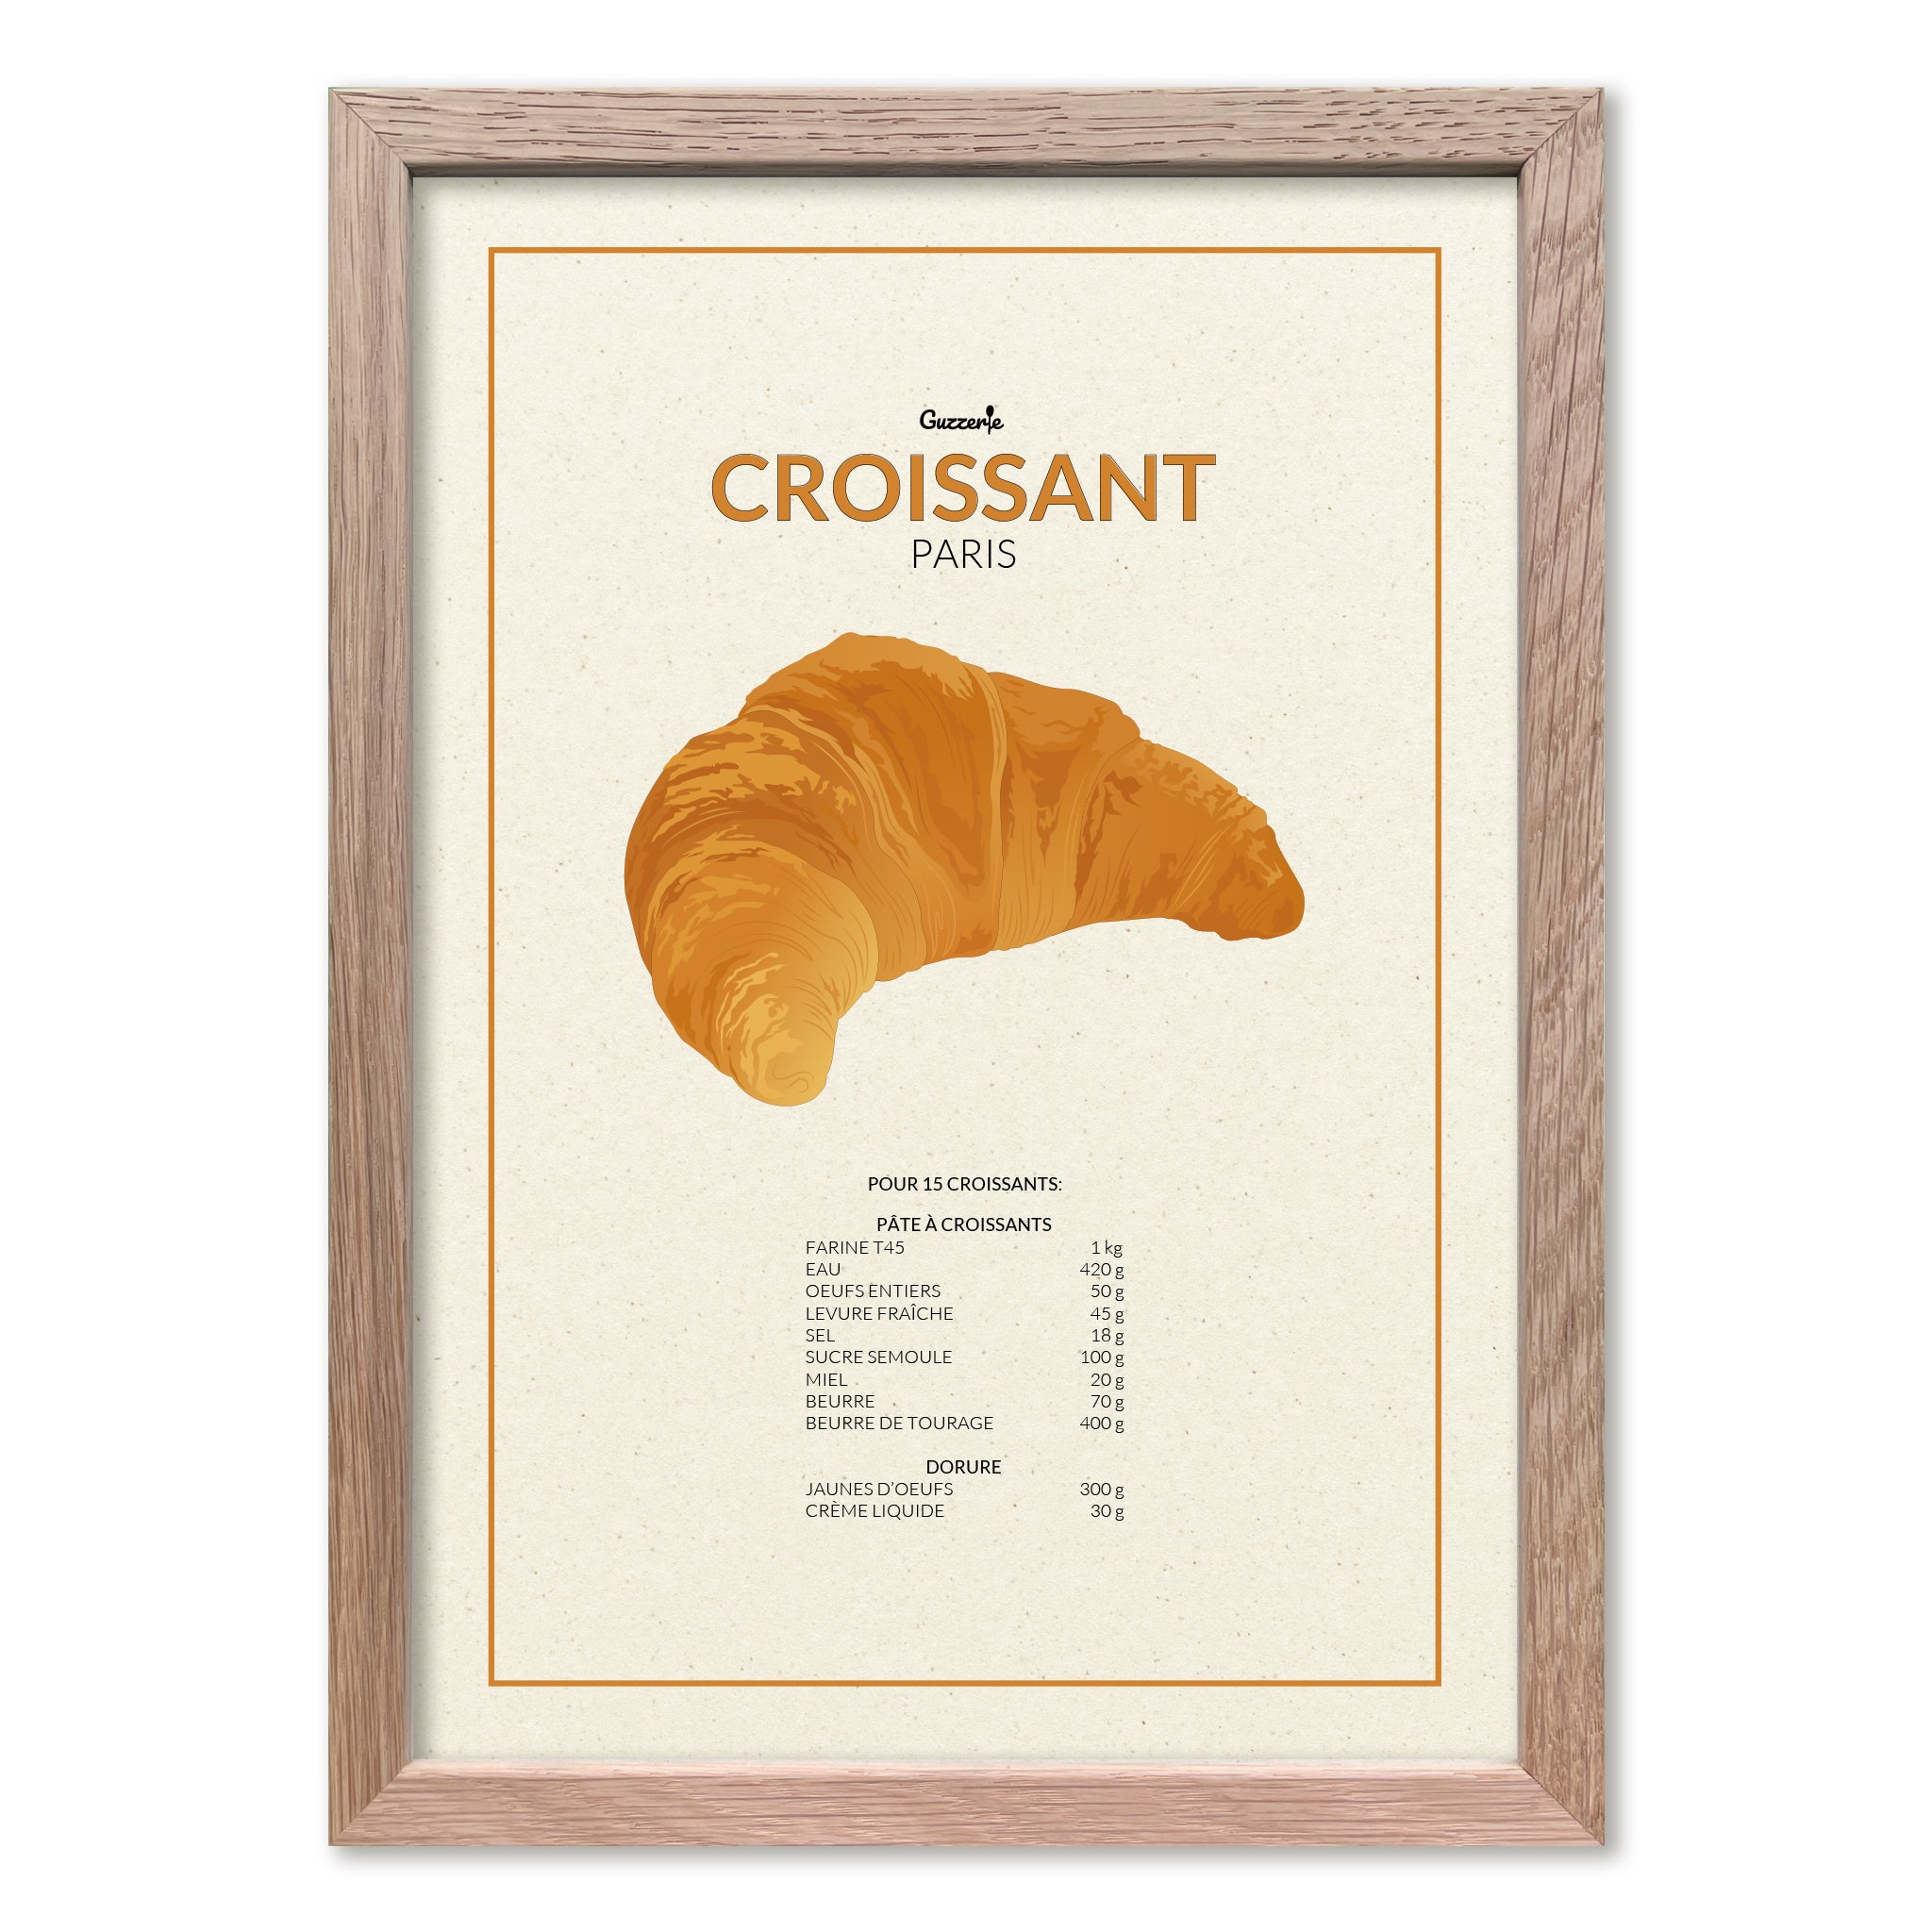 Iconic poster of Croissant | Guzzerie